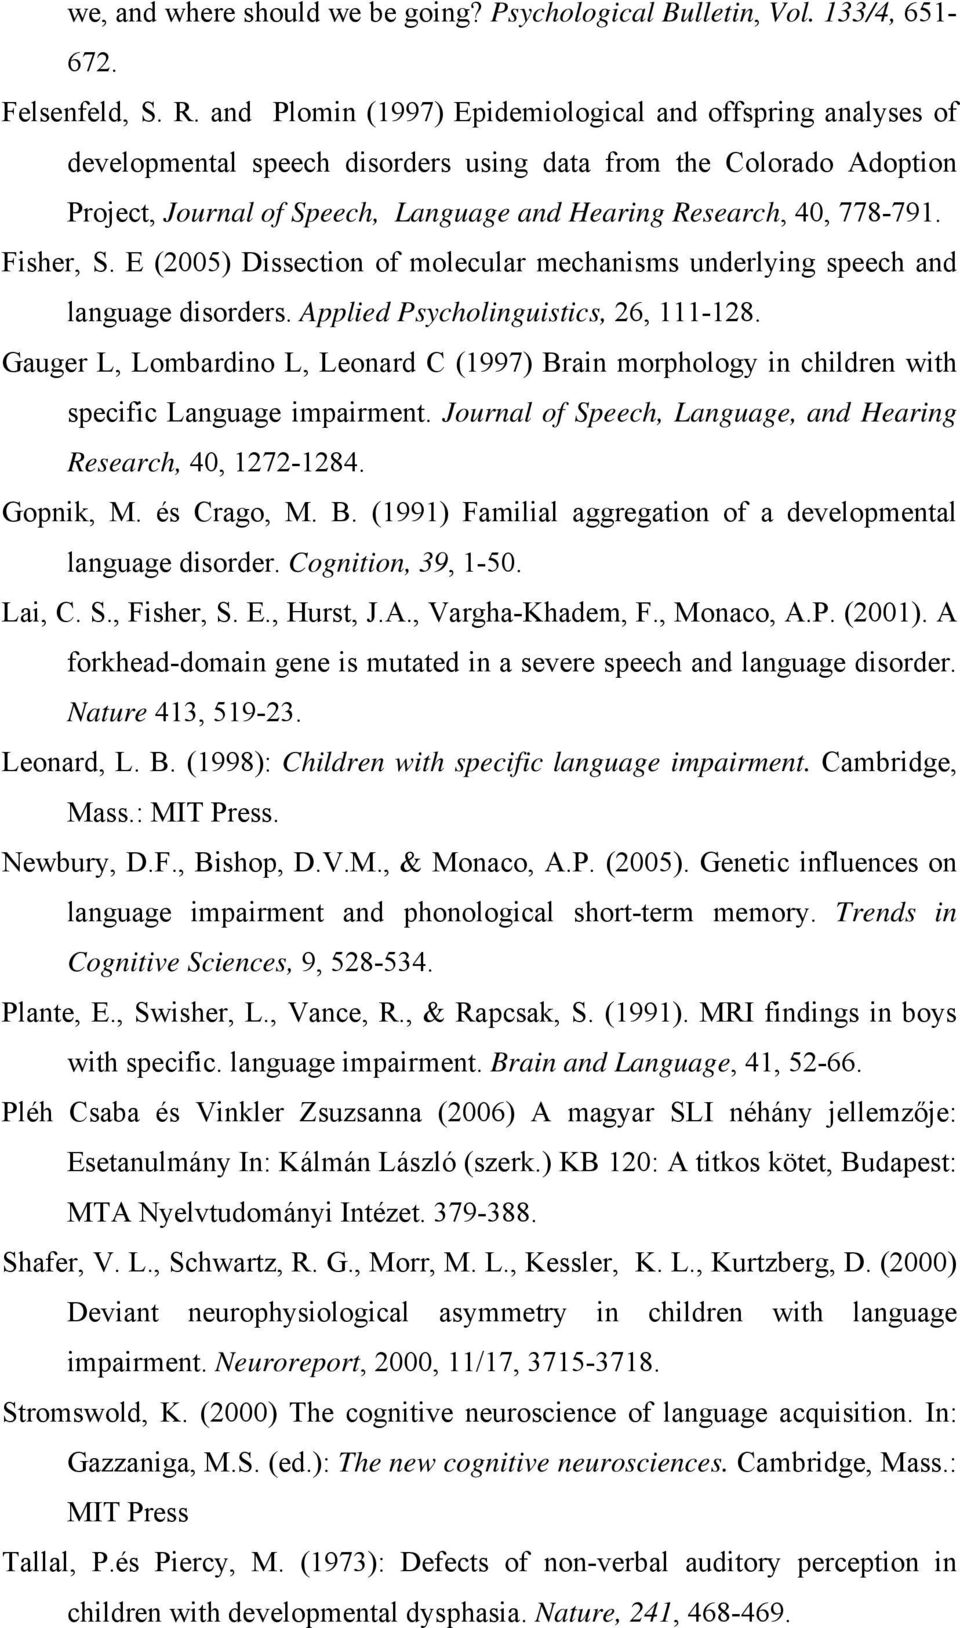 Fisher, S. E (2005) Dissection of molecular mechanisms underlying speech and language disorders. Applied Psycholinguistics, 26, 111-128.